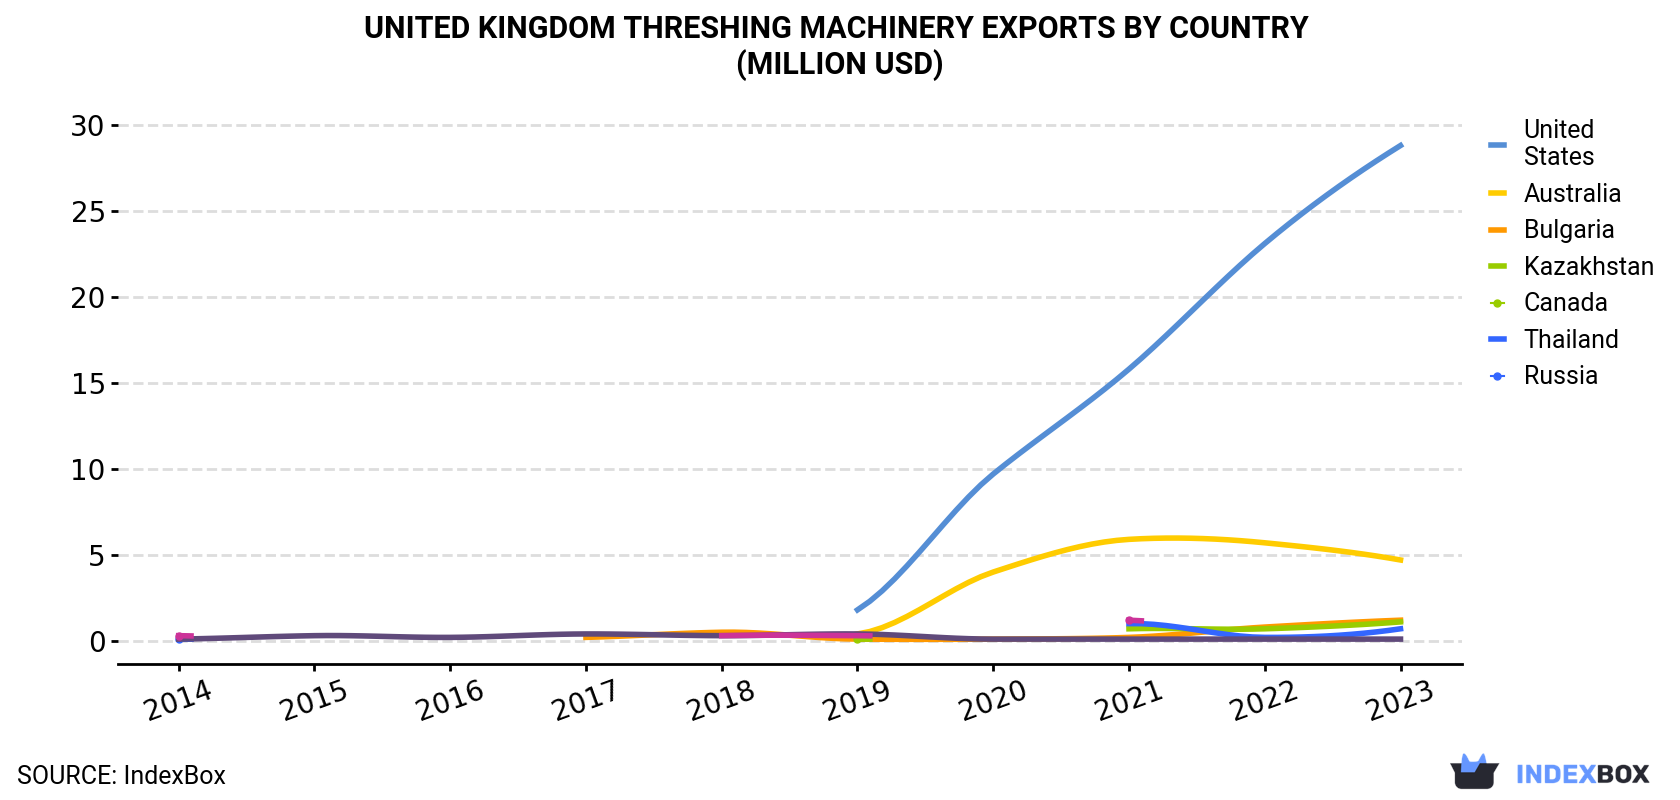 United Kingdom Threshing Machinery Exports By Country (Million USD)